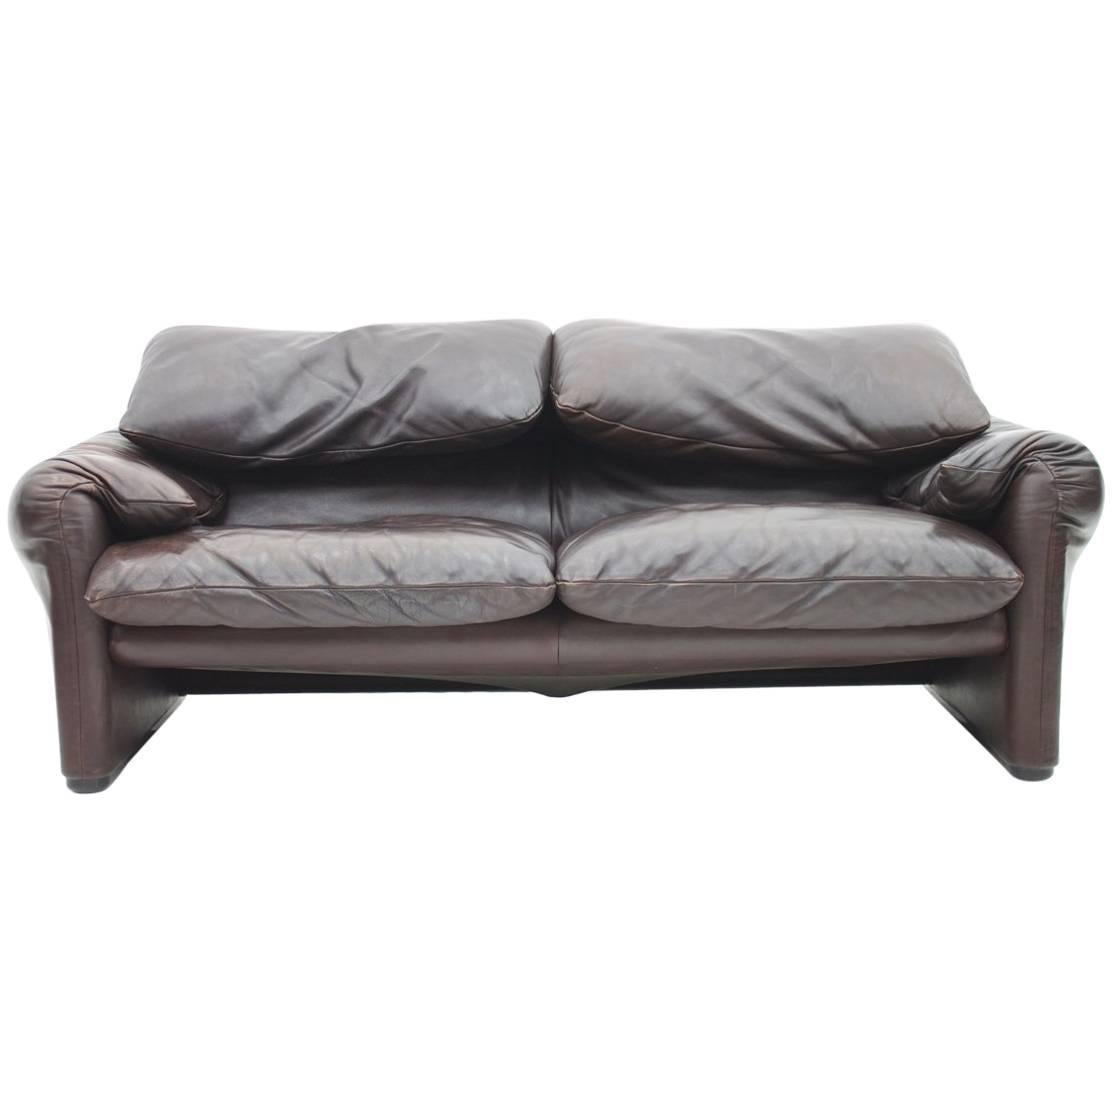 Leather Two-Seat Sofa Maralunga by Vico Magistretti for Cassina, 1973 For Sale